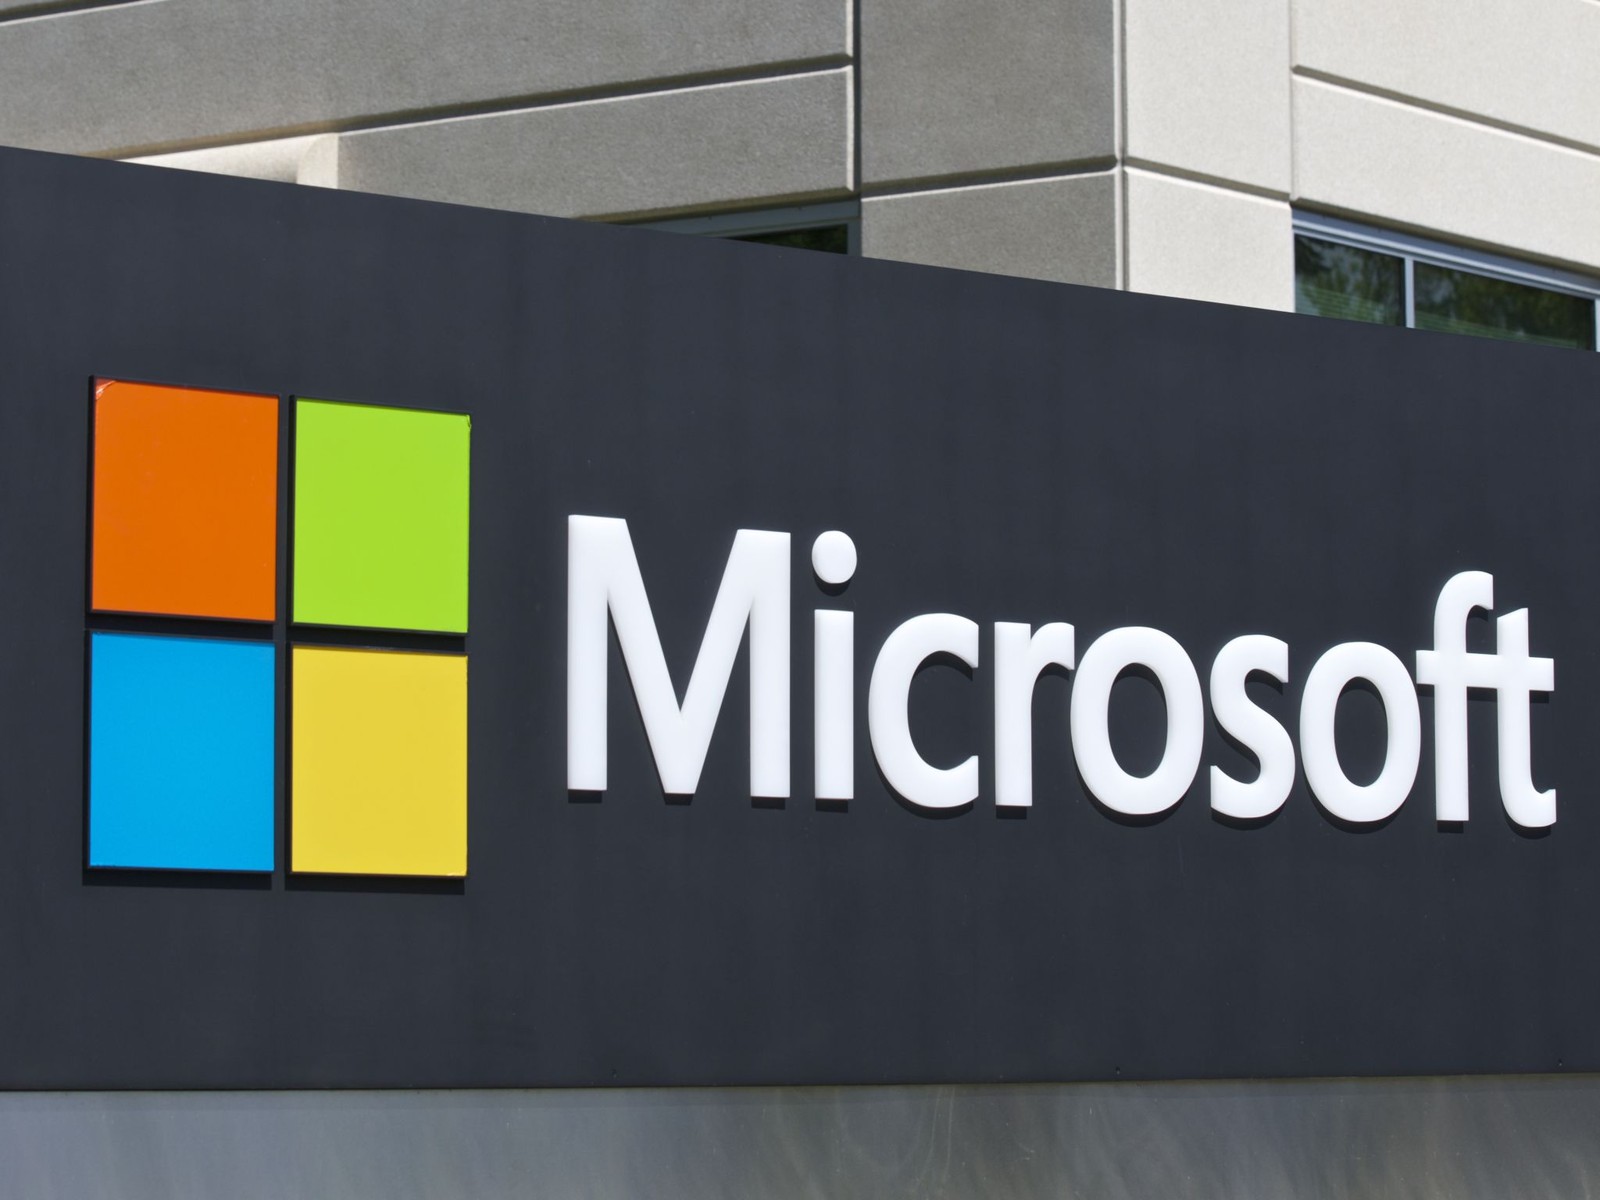 Microsoft is Now Second Largest Company by Market Value